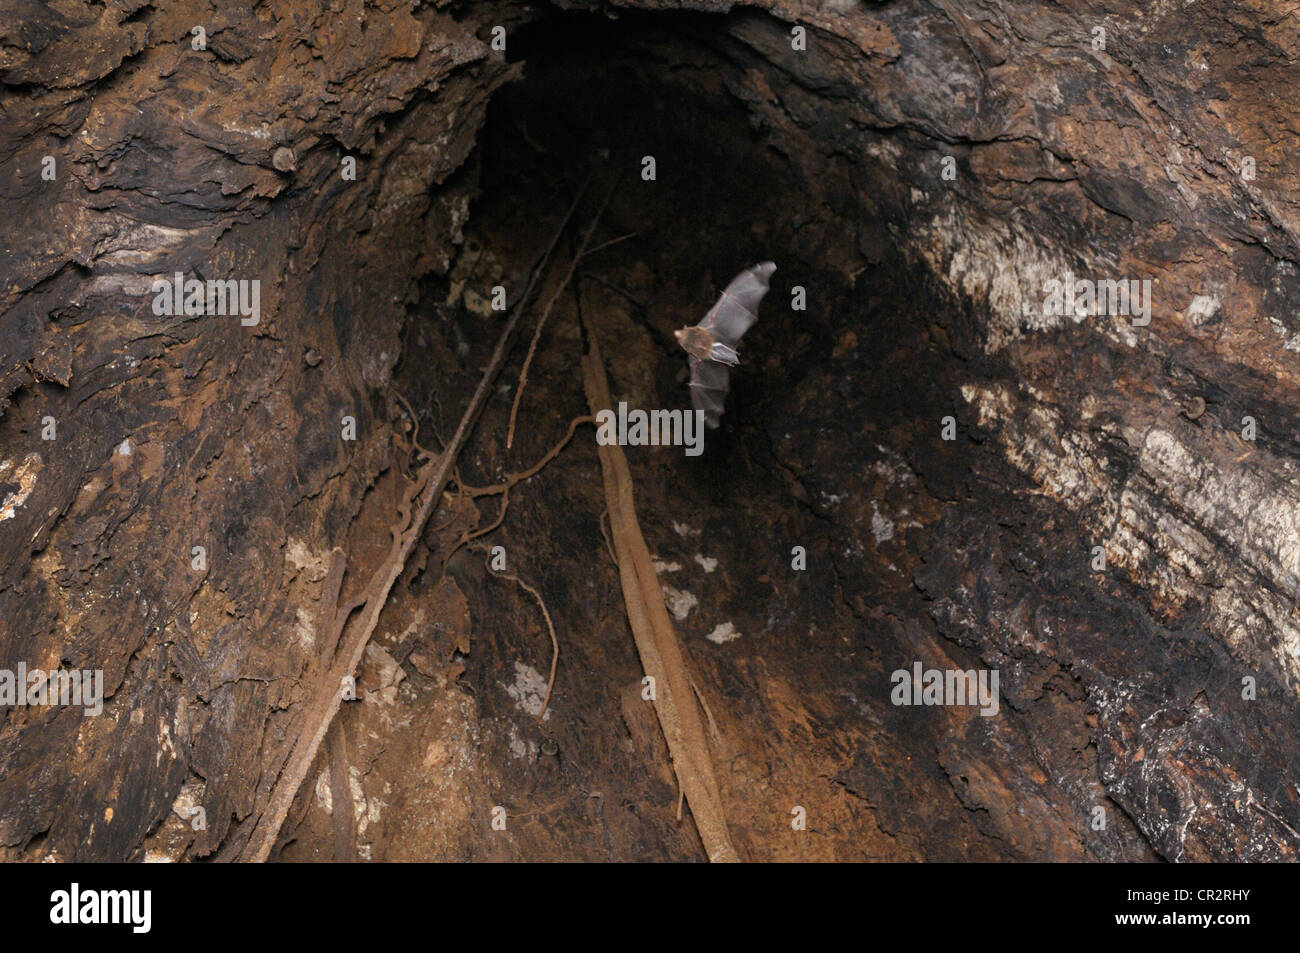 Bat flying inside the trunk of a giant old growth almond tree, lowland rainforest, Chilamate, Costa Rica Stock Photo